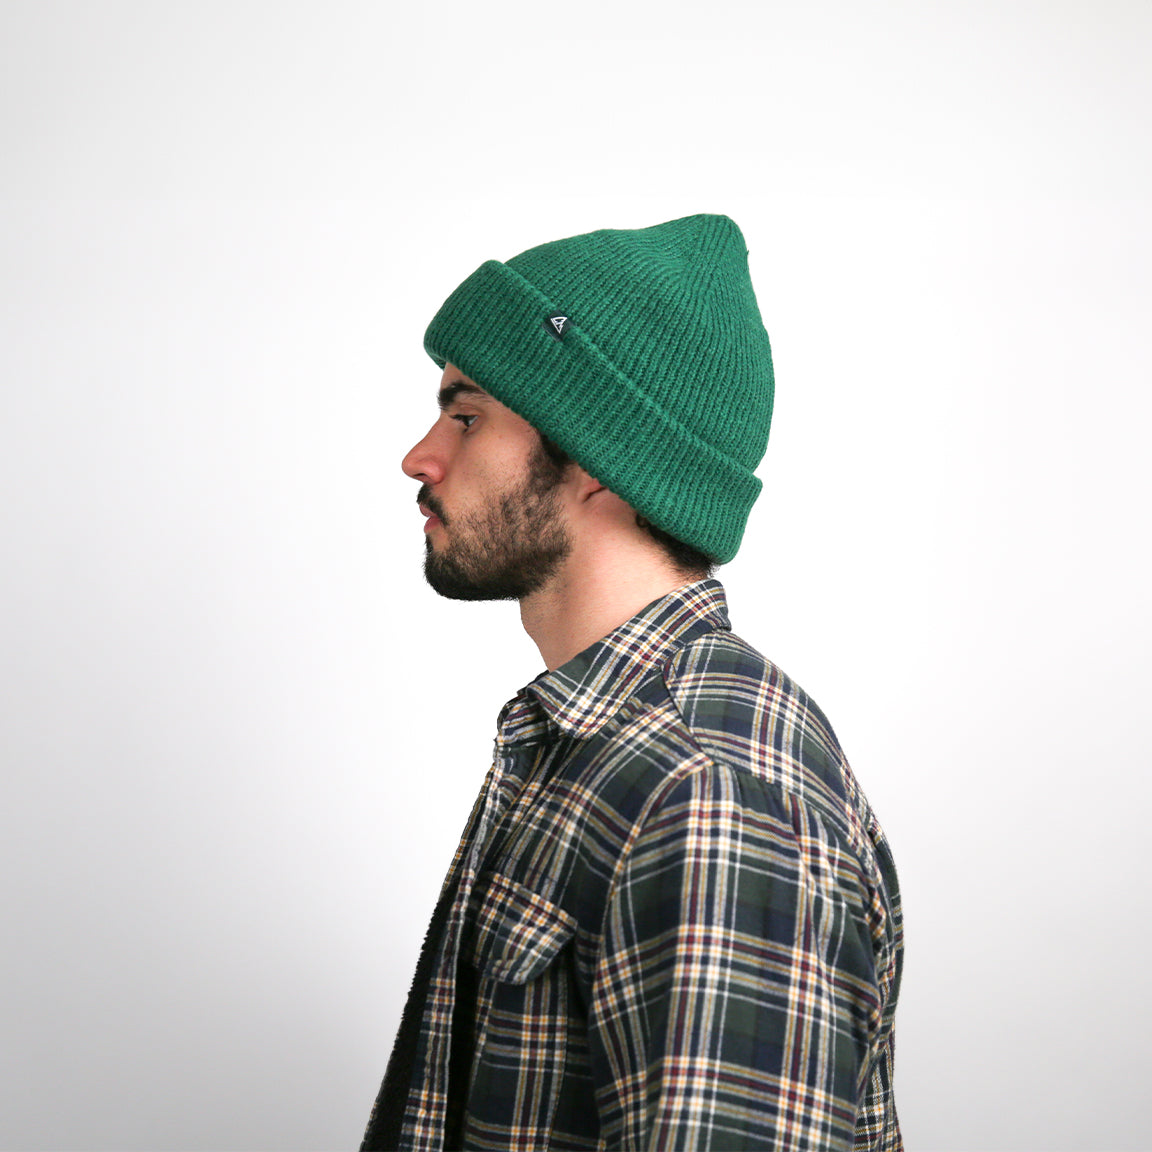 From the side, the forest green beanie's ribbed texture and rolled brim are more apparent, showcasing the hat's snug fit and the richness of its color, suitable for chilly weather.